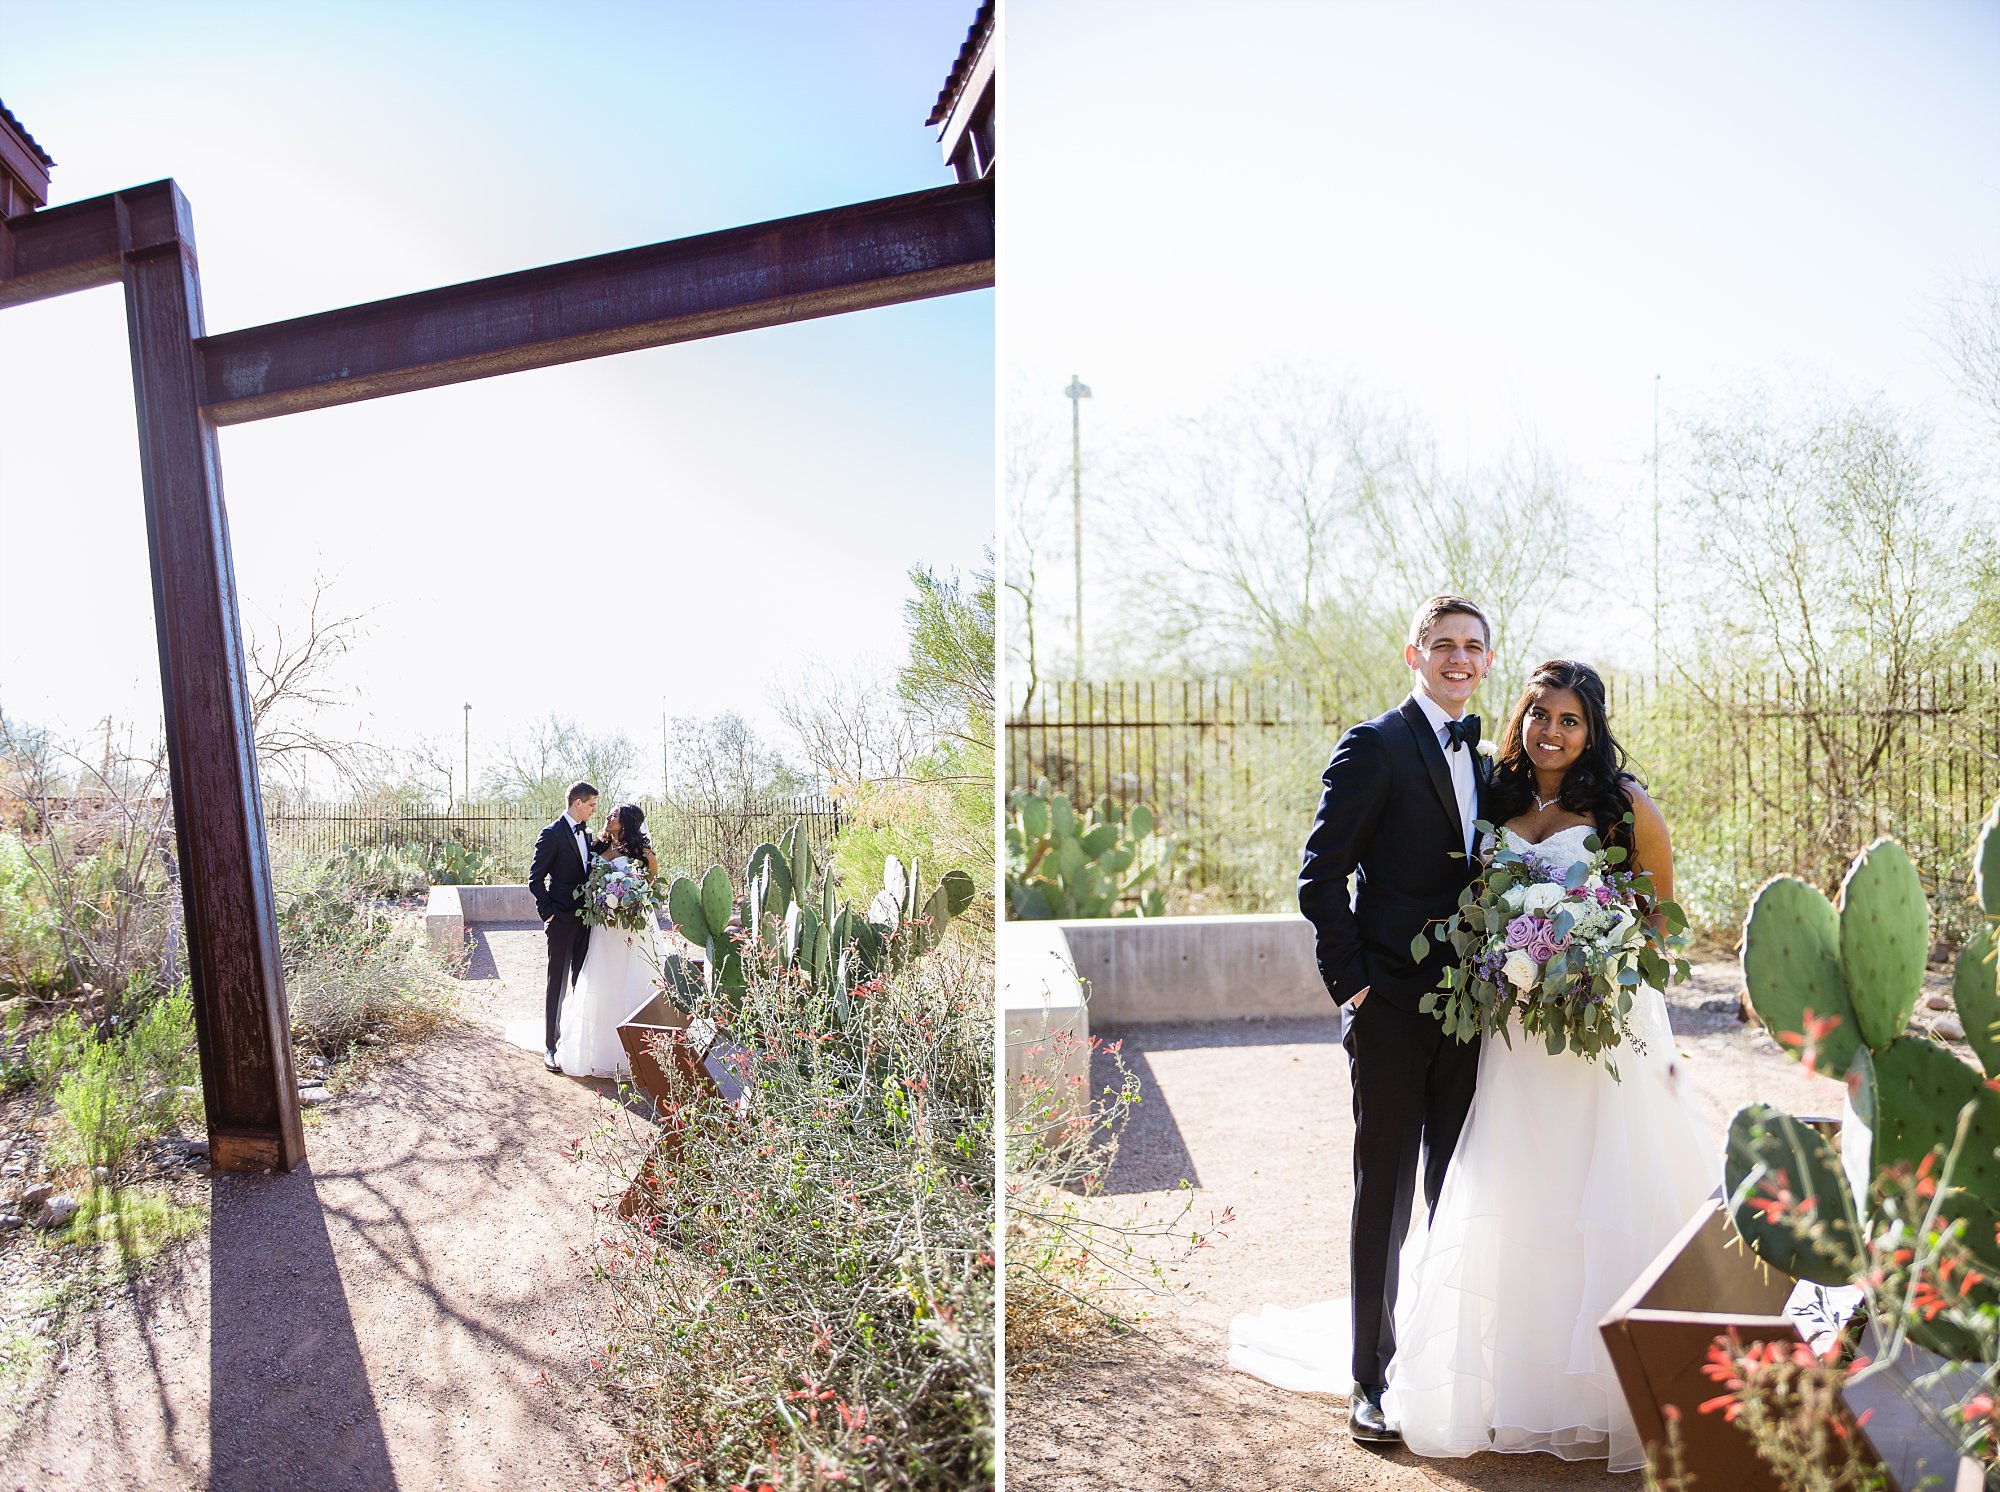 Bride and groom surrounded by the beauty of the winter desert at the Rio Salado Audubon Center by Phoenix wedding photographers PMA Photography.